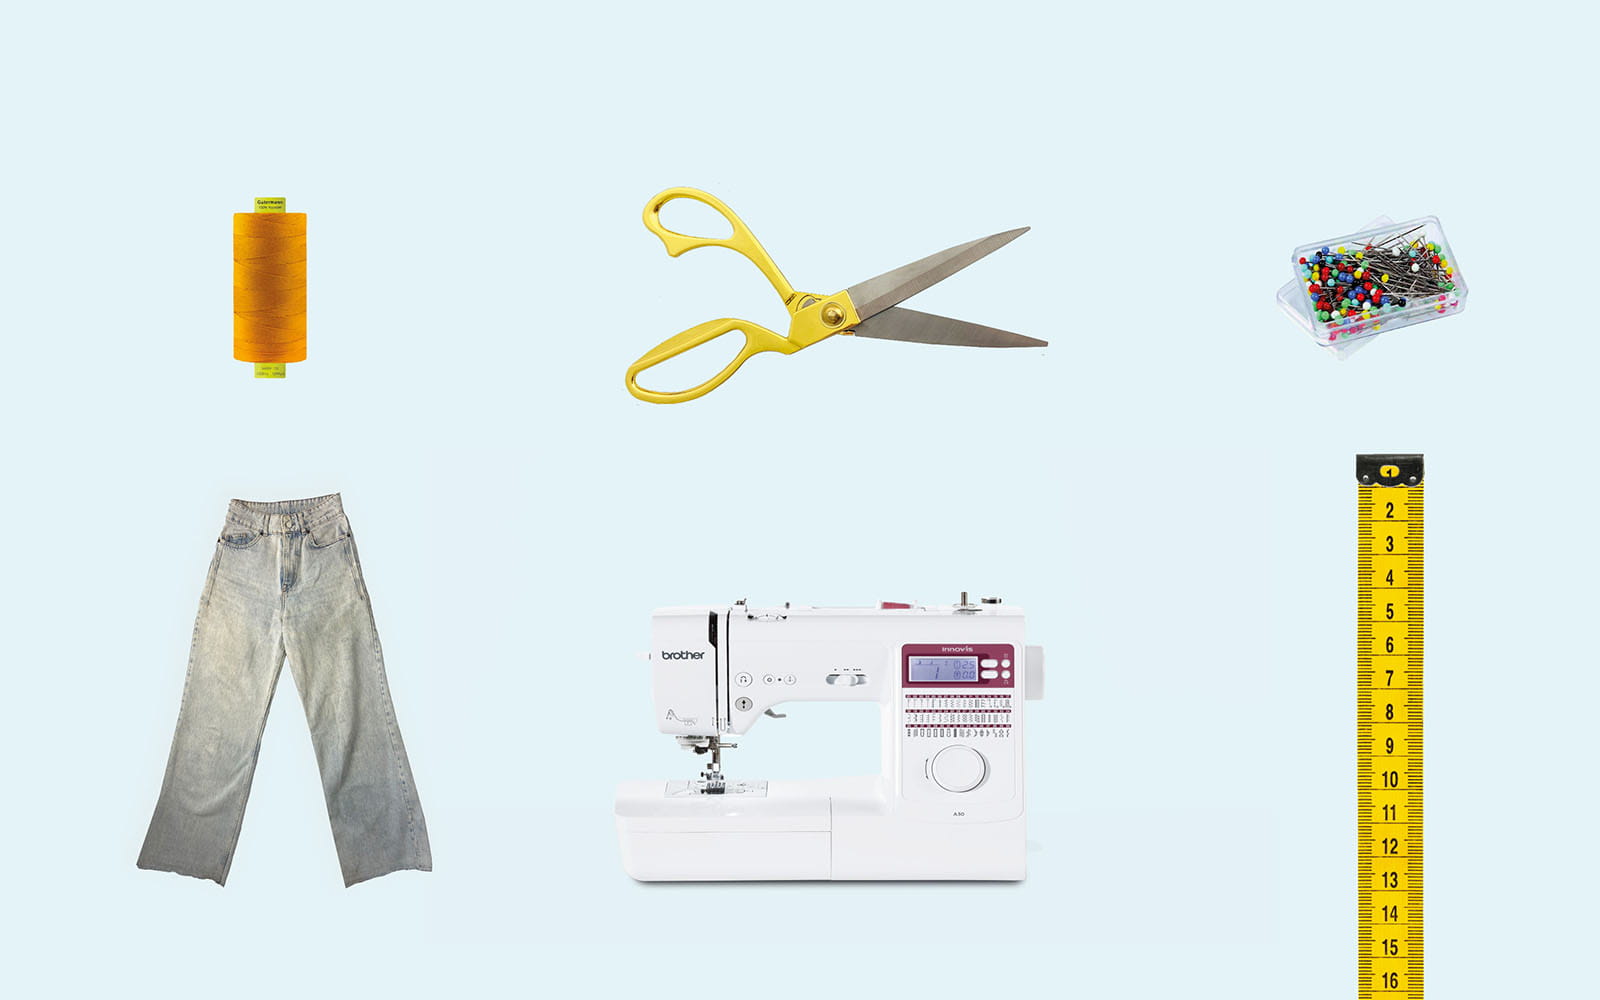 Brother Innov-is A50 sewing machine, jeans and sewing tools